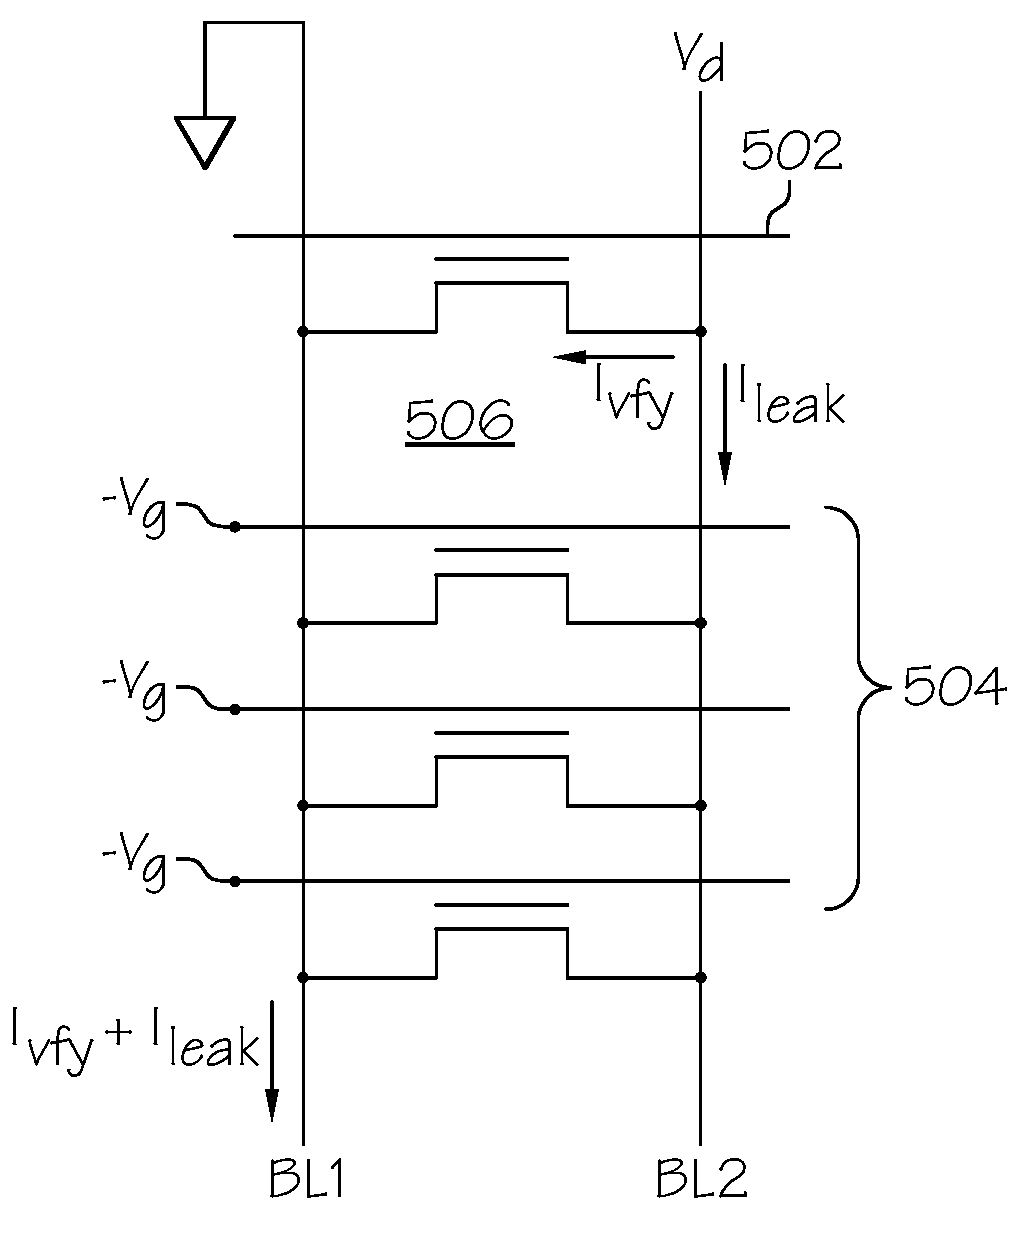 Negative wordline bias for reduction of leakage current during flash memory operation